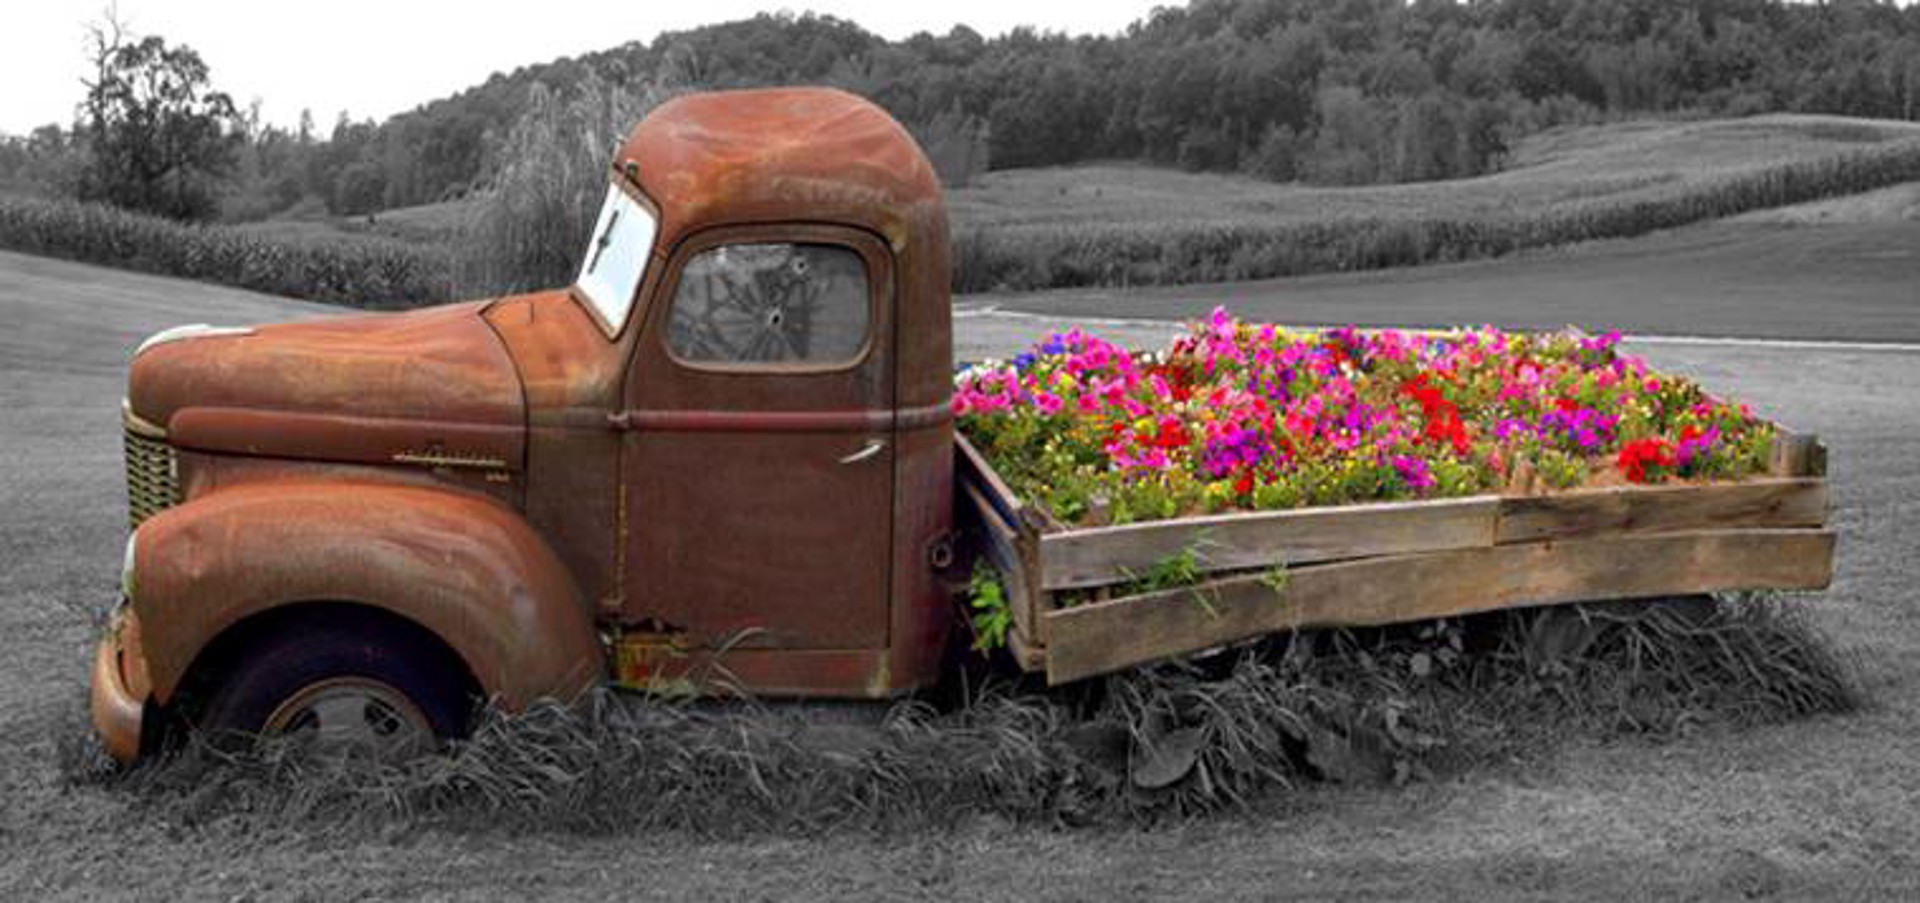 Truck and Flowers by Pete Ramberg